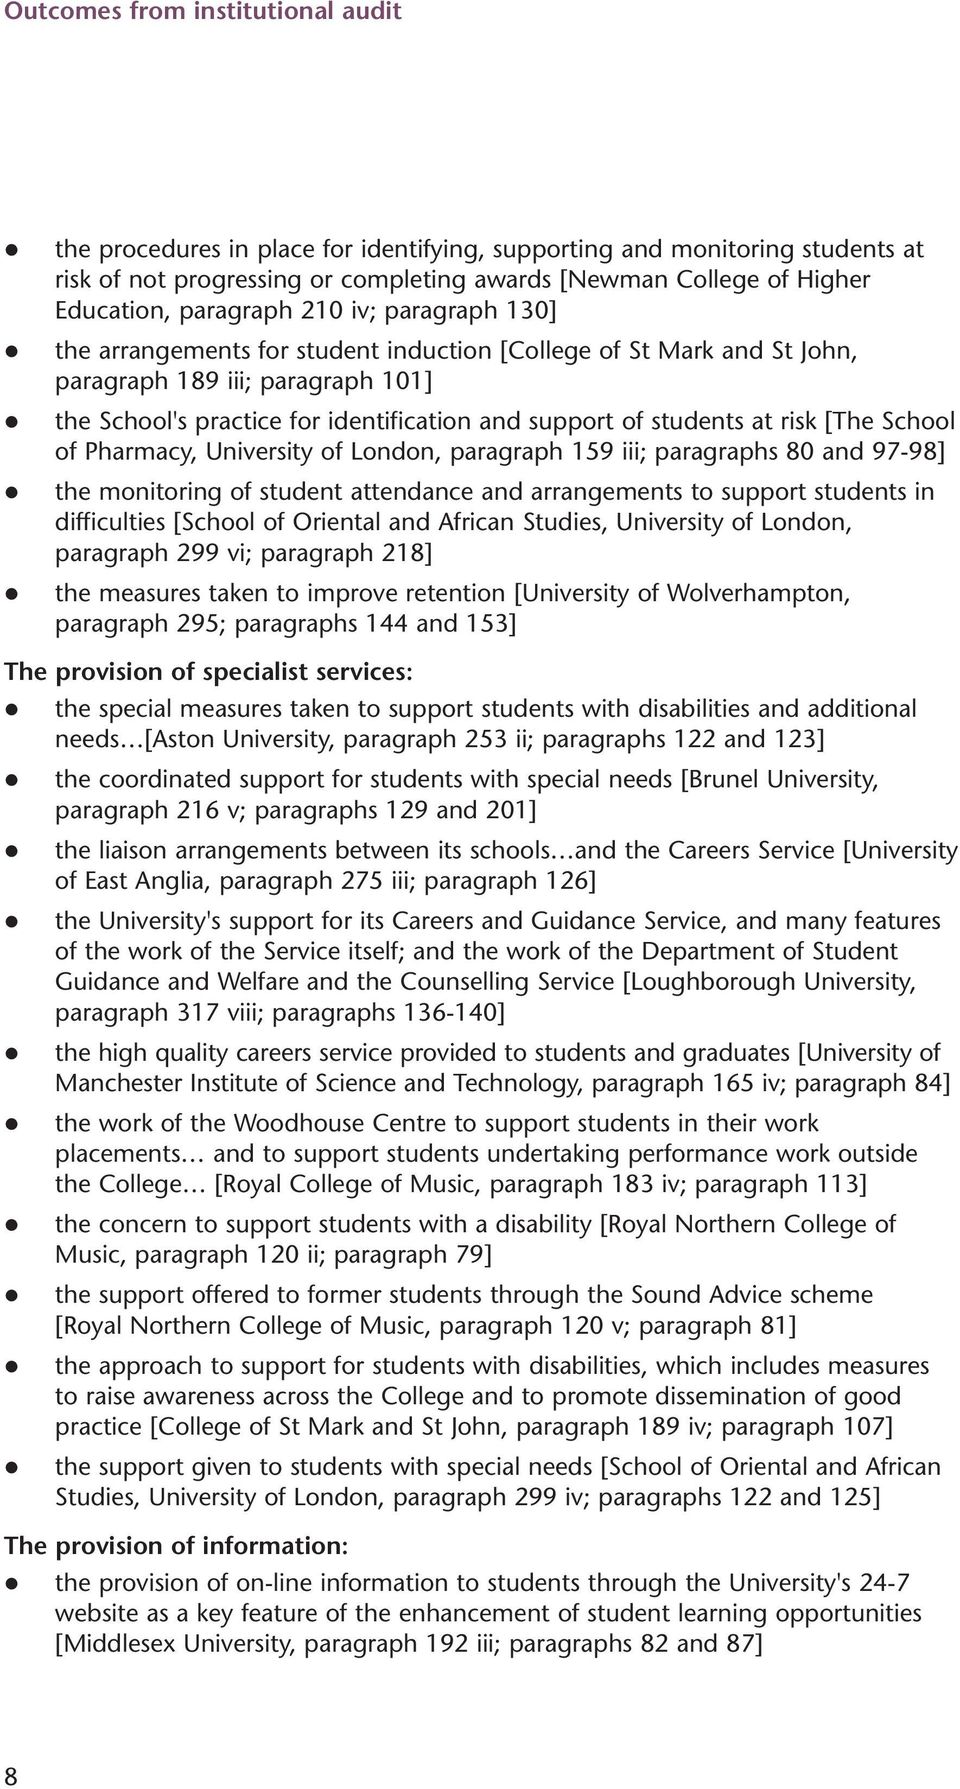 students at risk [The School of Pharmacy, University of London, paragraph 159 iii; paragraphs 80 and 97-98] the monitoring of student attendance and arrangements to support students in difficulties